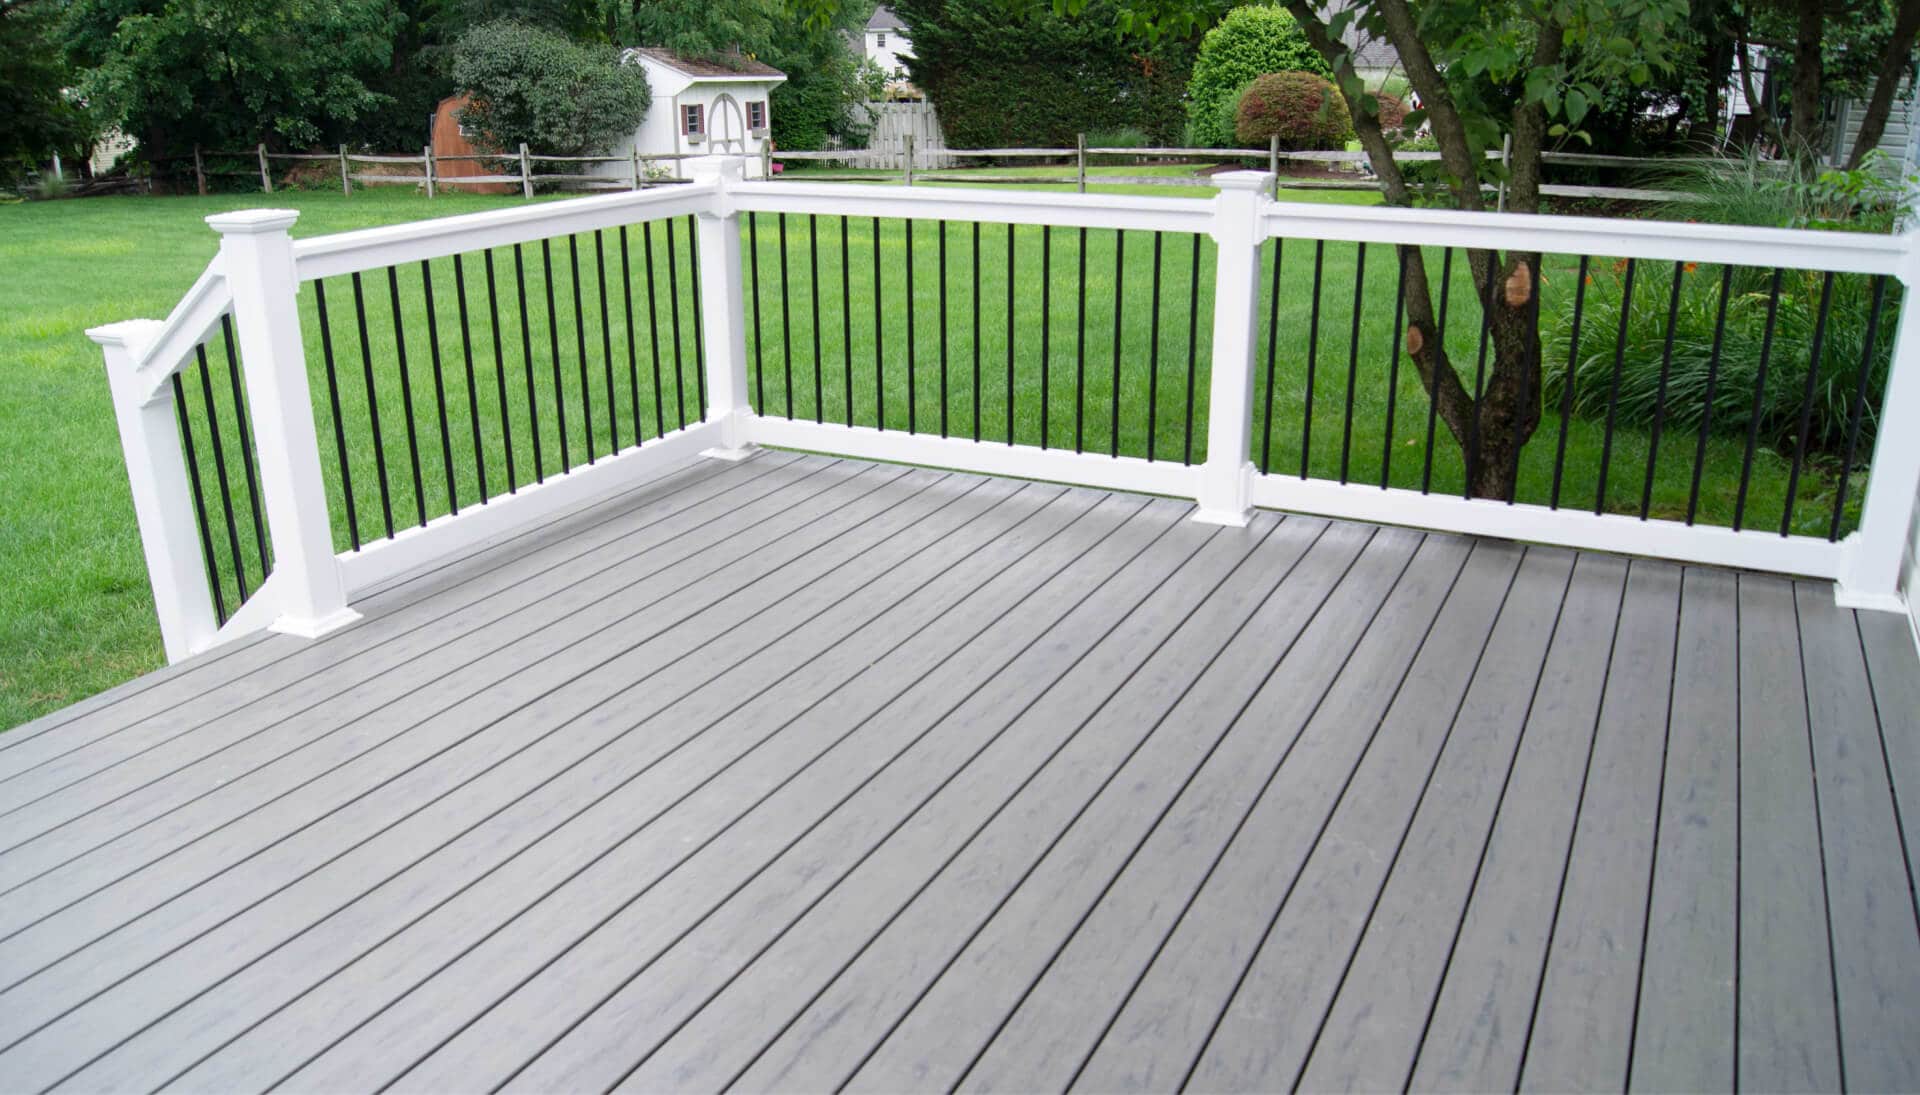 Specialists in deck railing and covers Worcester, Massachusetts